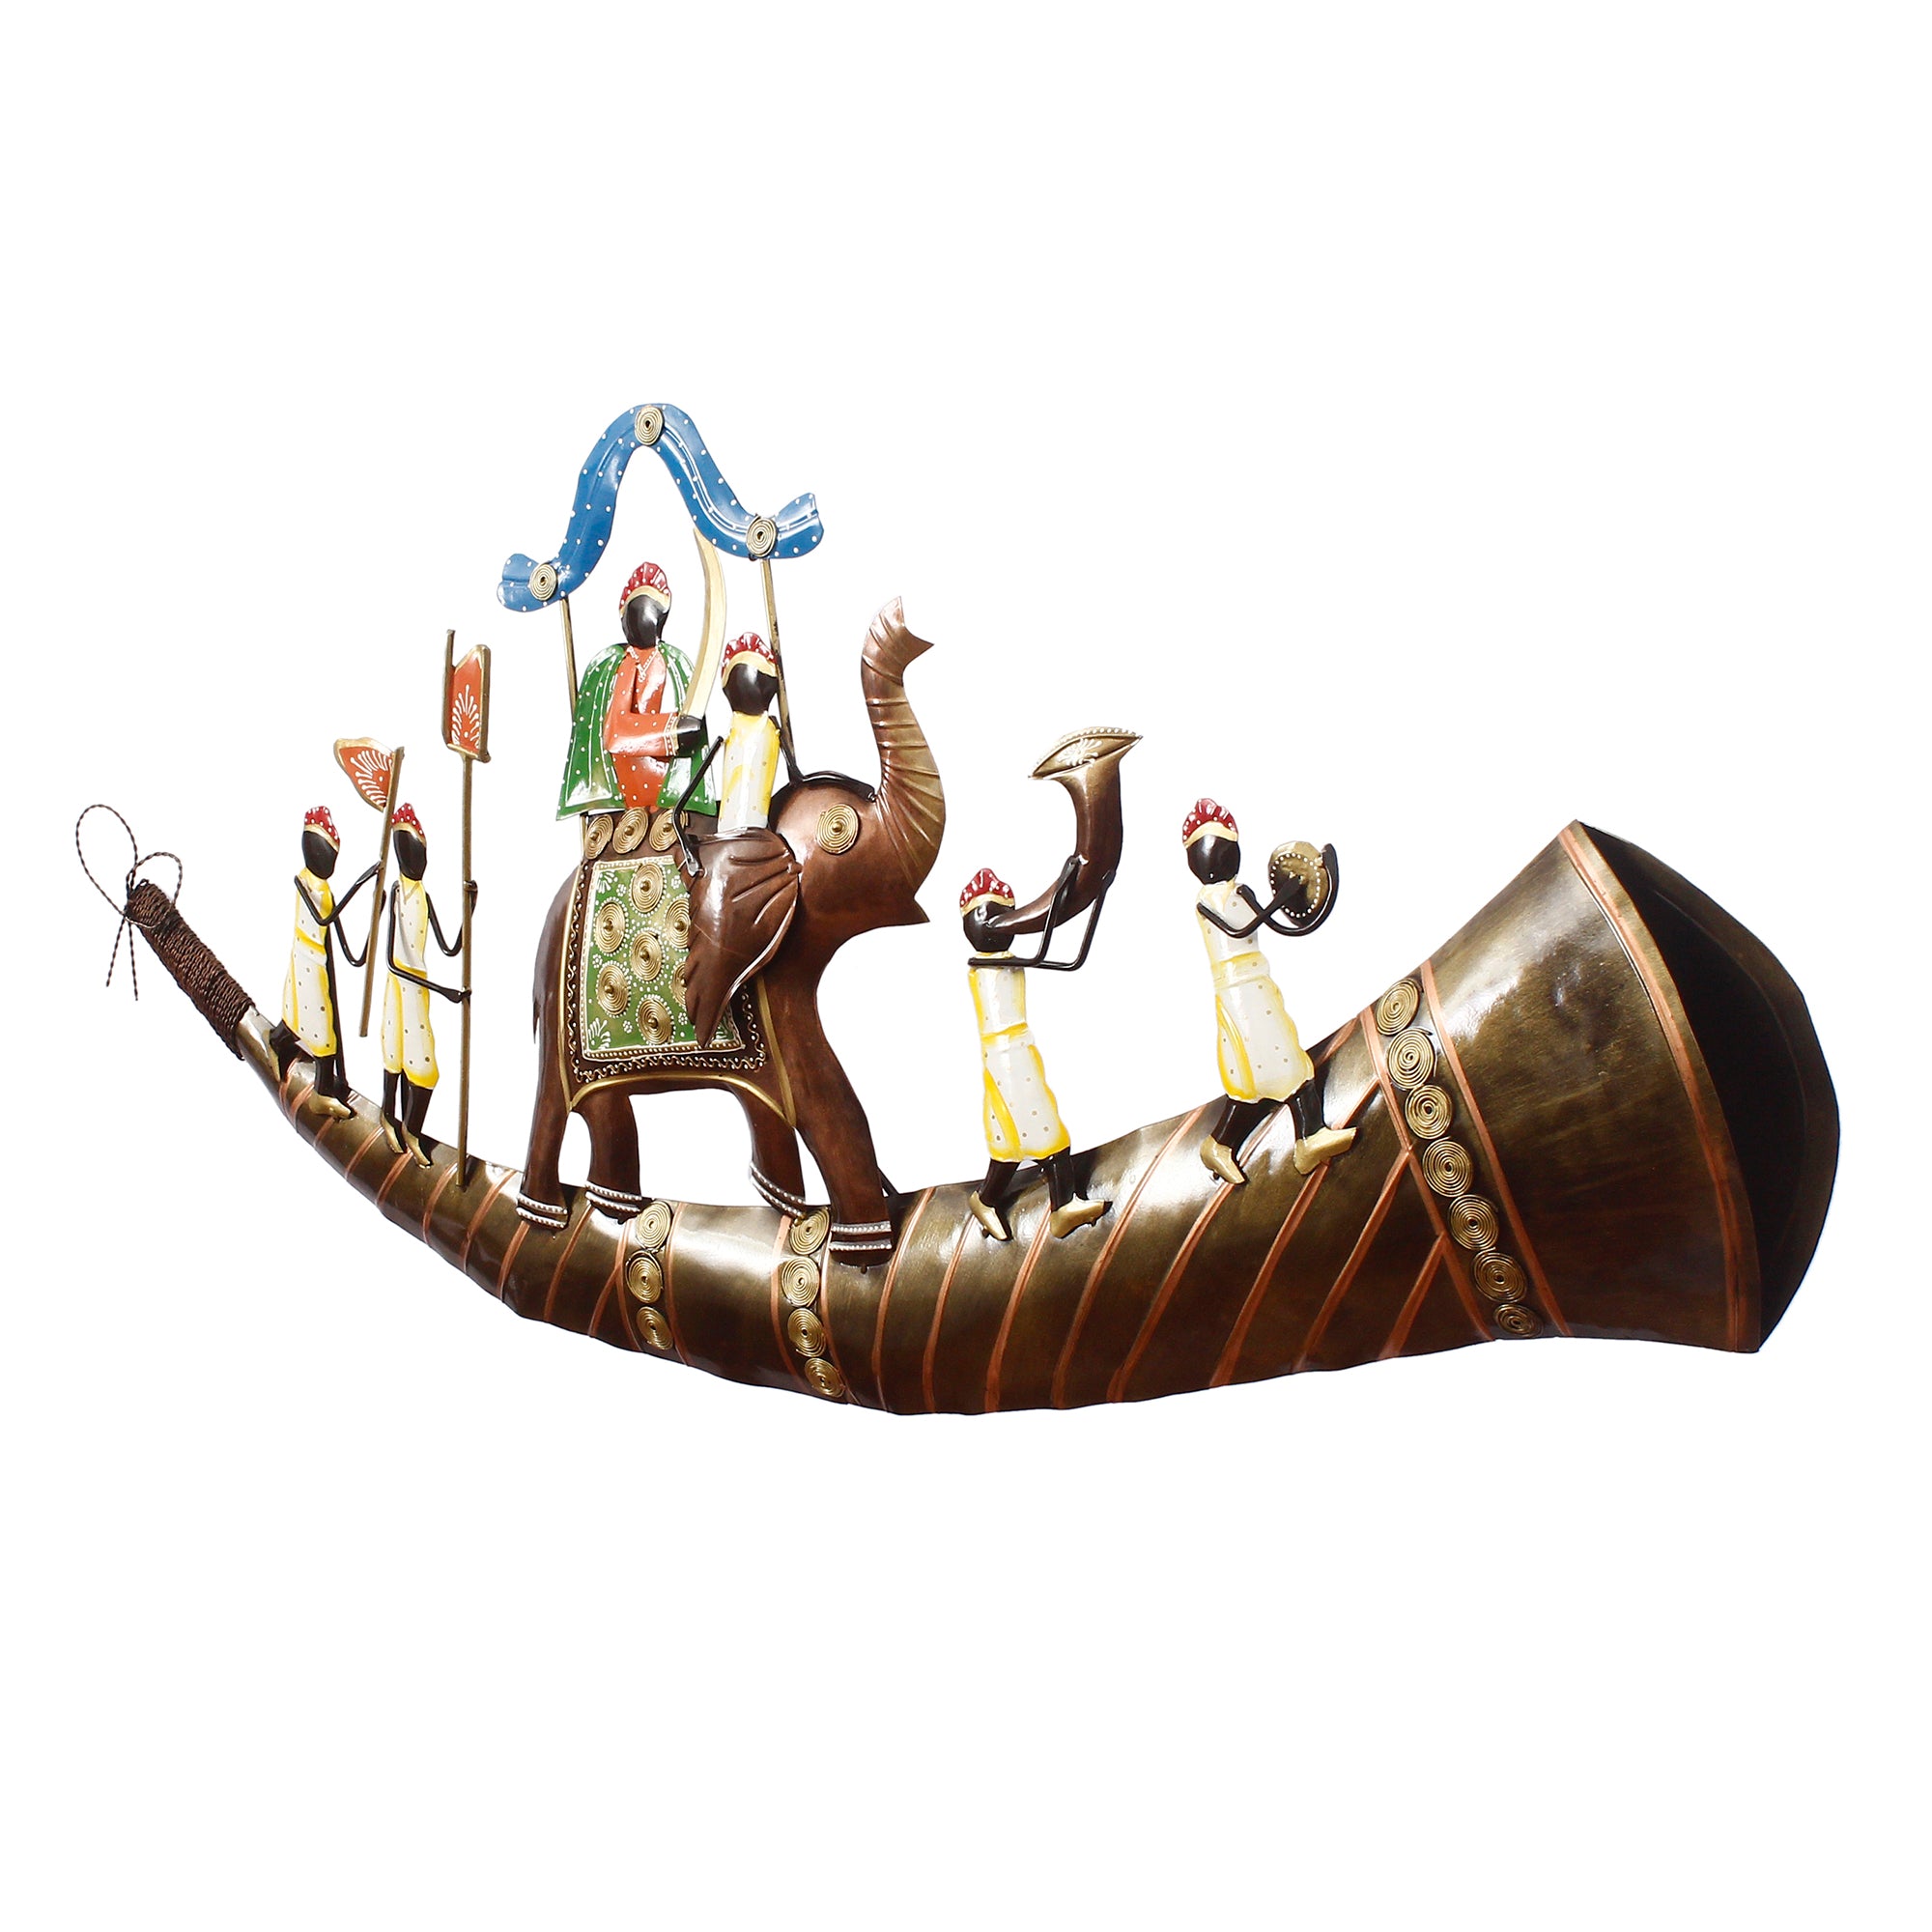 Royal Procession of King on Shehnai Decorative Iron Wall Hanging/Art (Brown, Blue and Green) 5